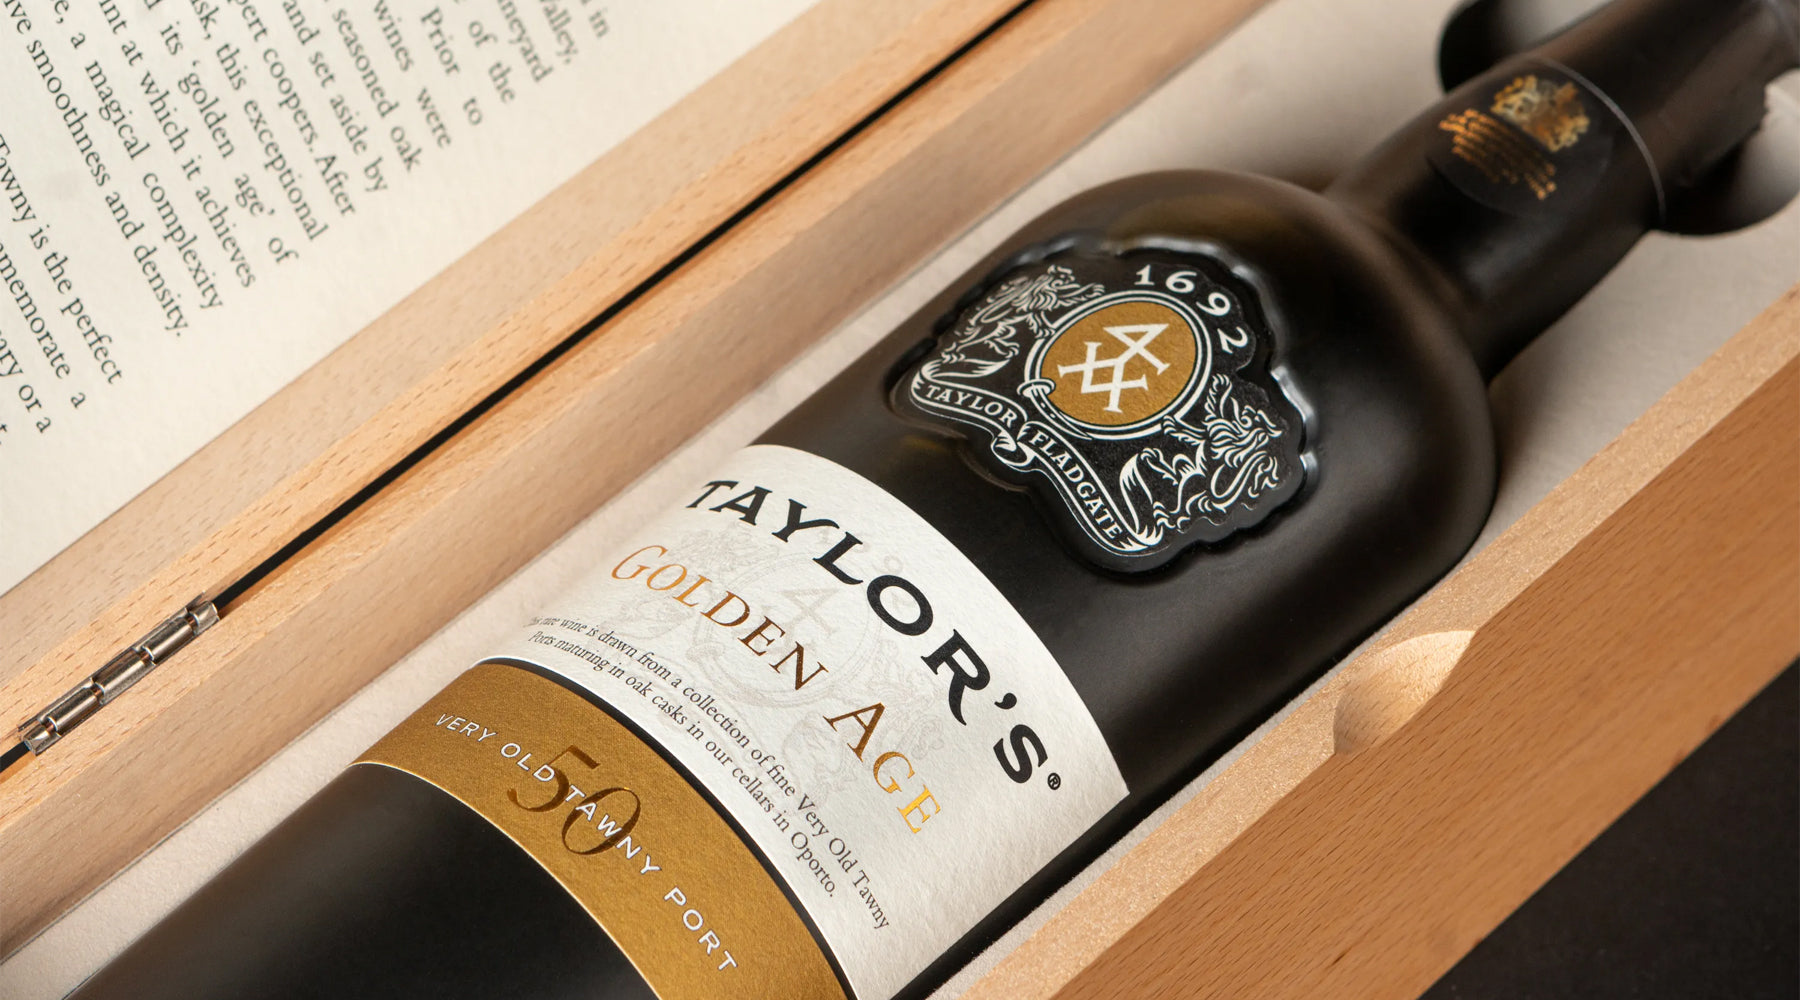 Golden Age Is The Newest Member Of The Taylor's Port Family